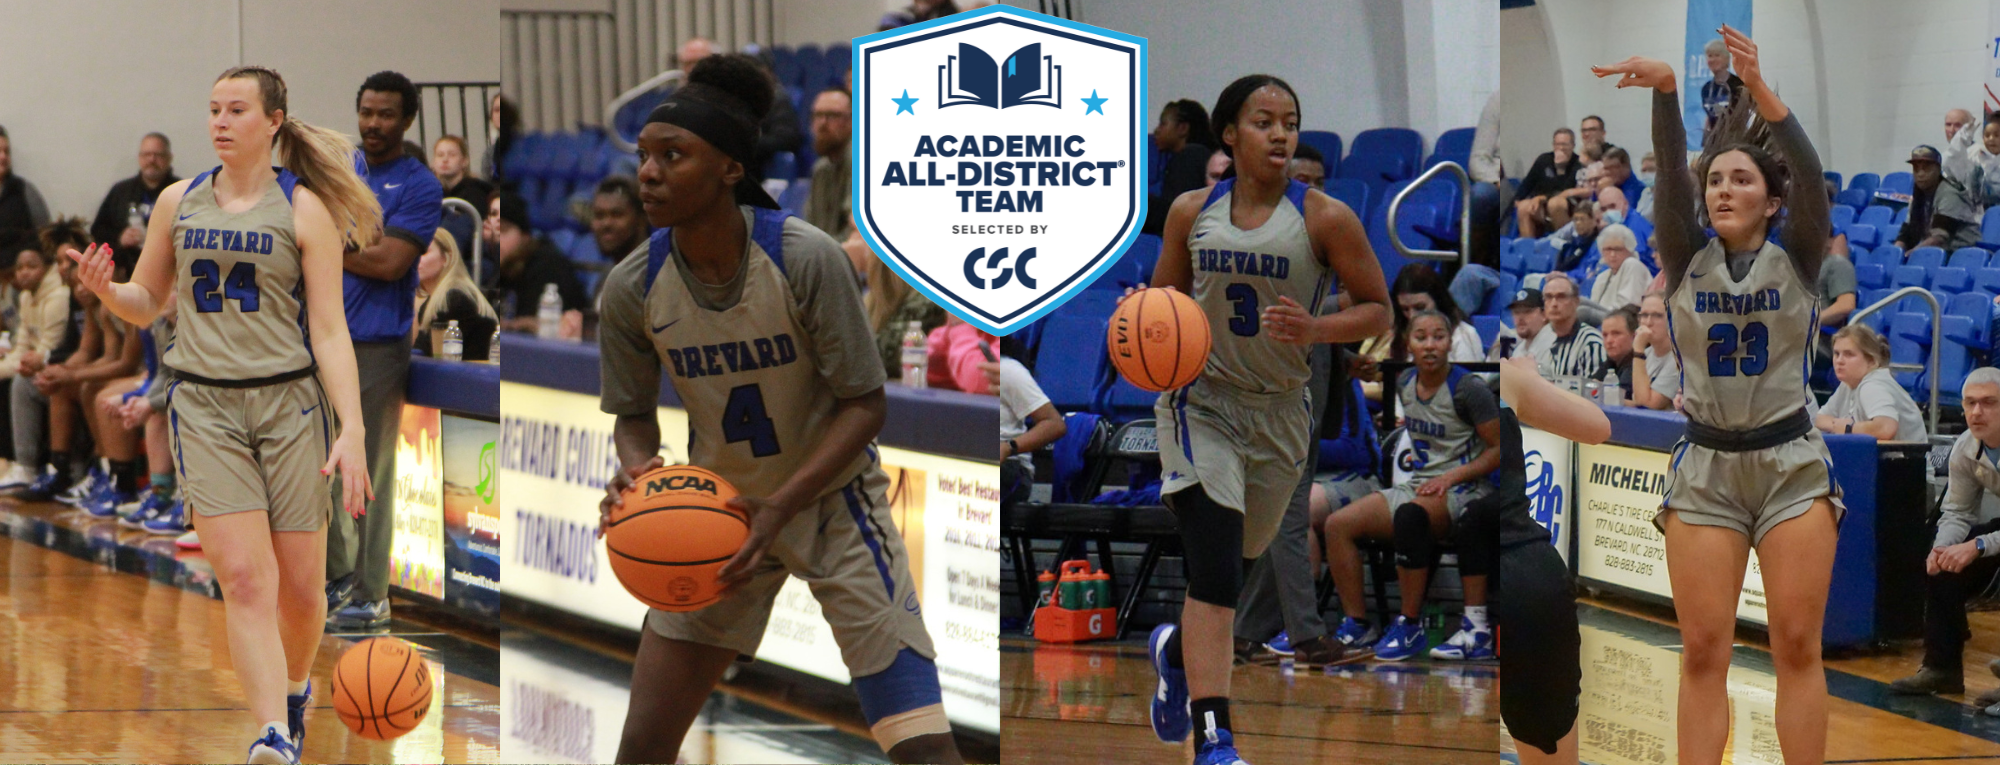 Program-Best Four Tornados from BC Women’s Basketball Named Academic All-District Team